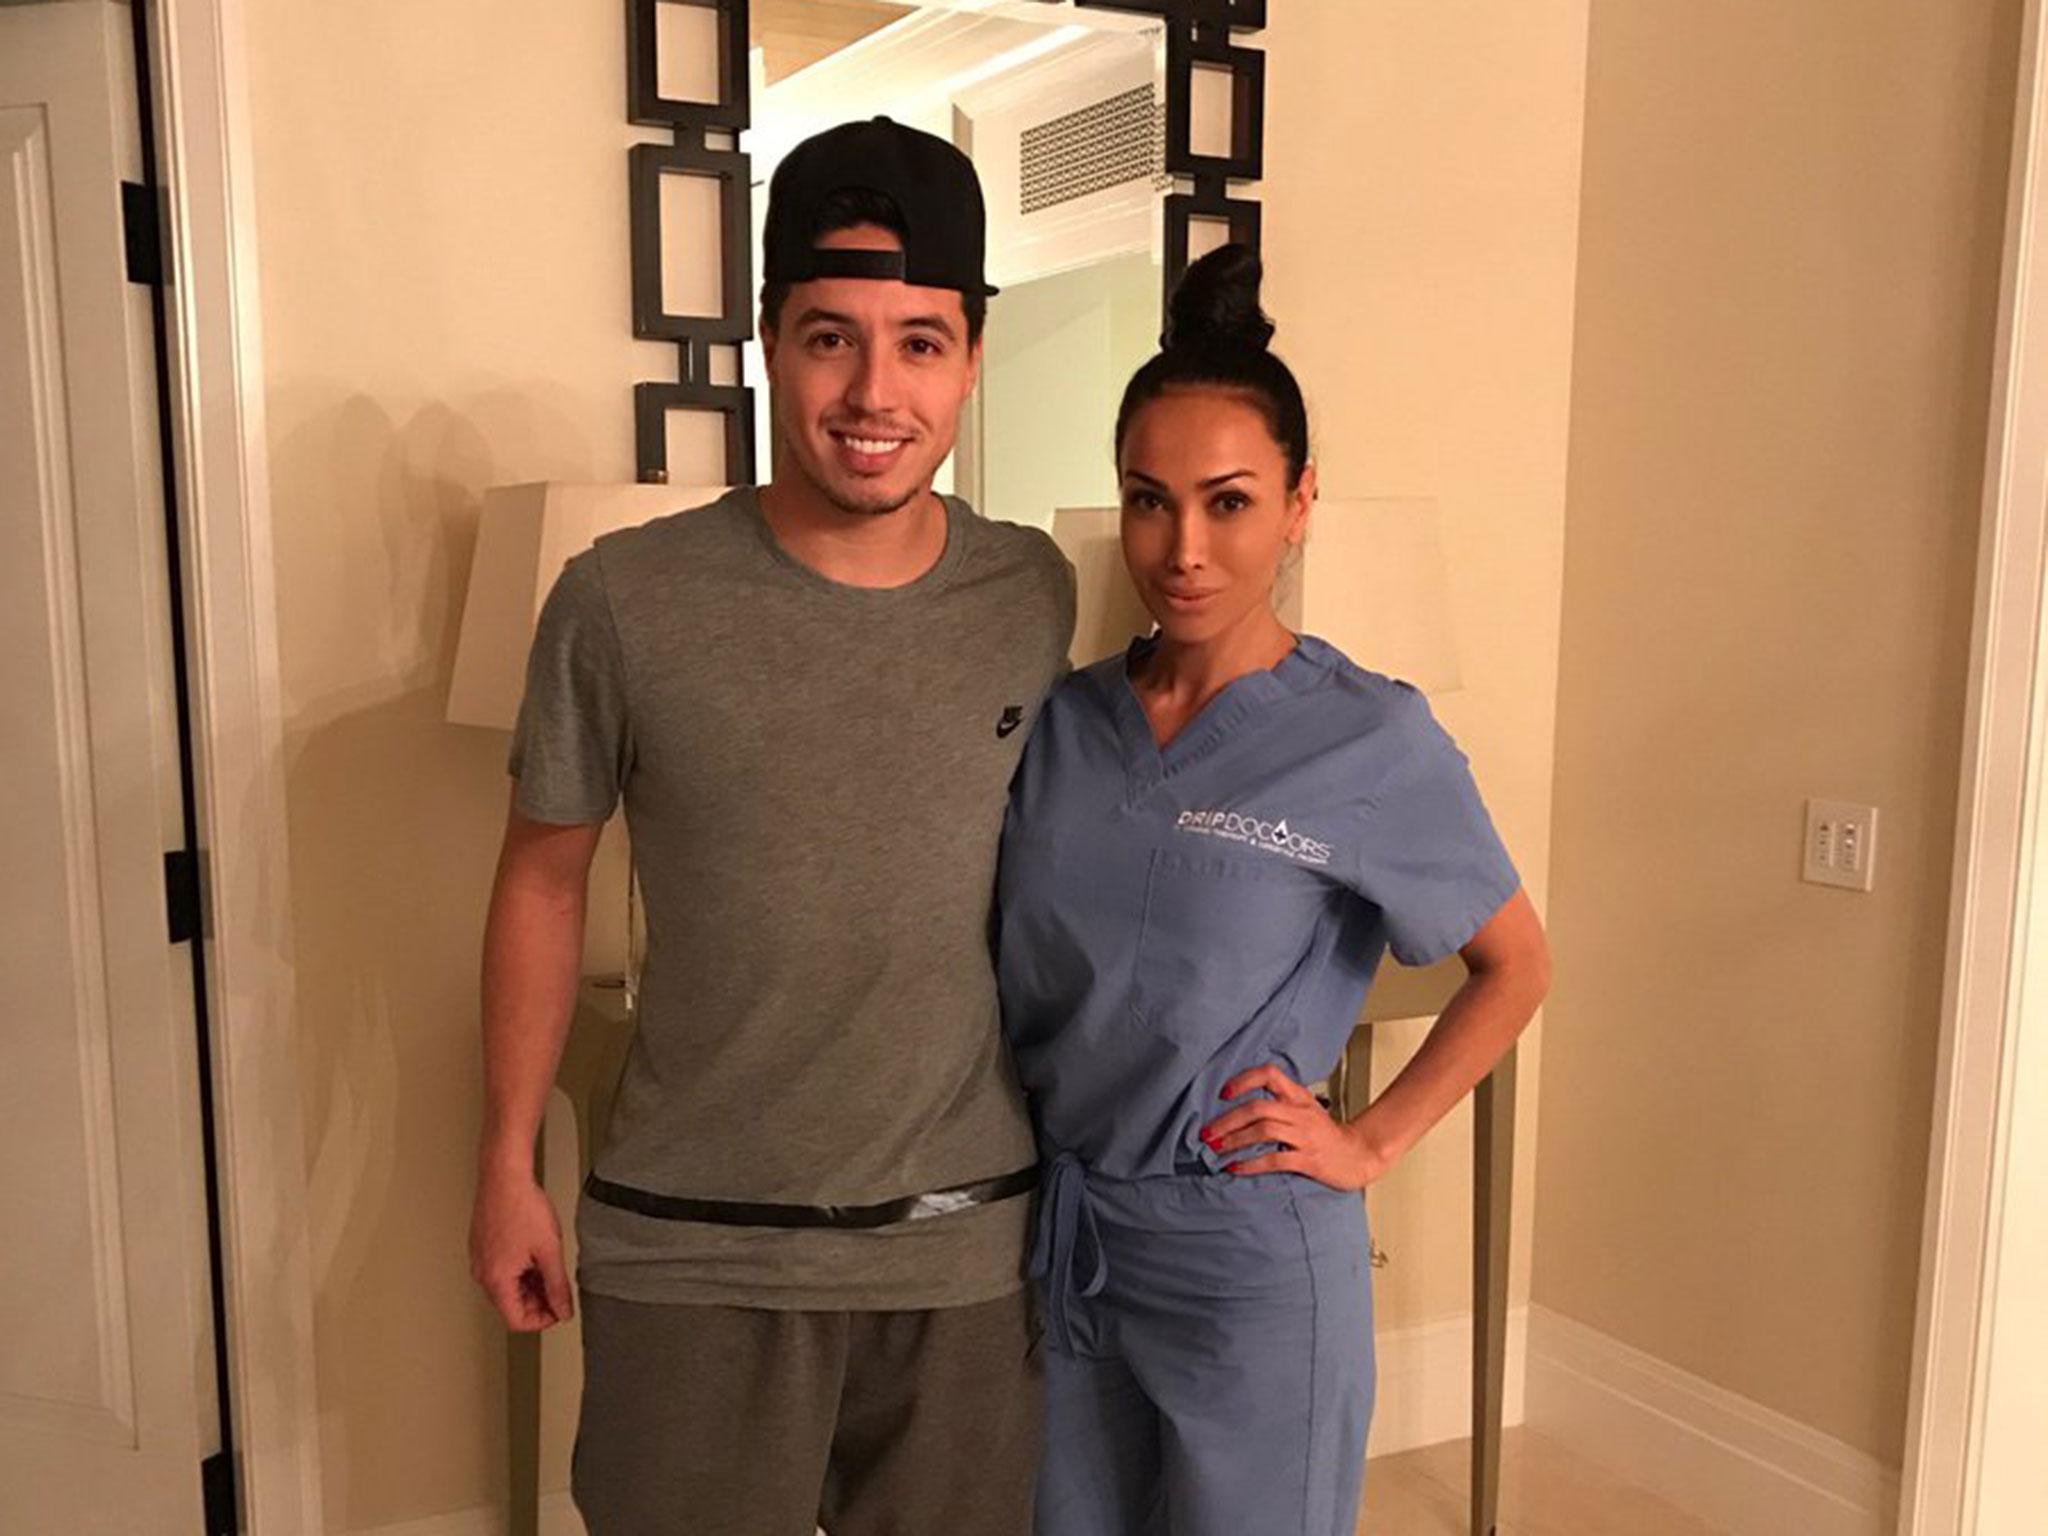 Samir Nasri was pictured attending the 'Drip Doctors' clinic where he had an IV drip